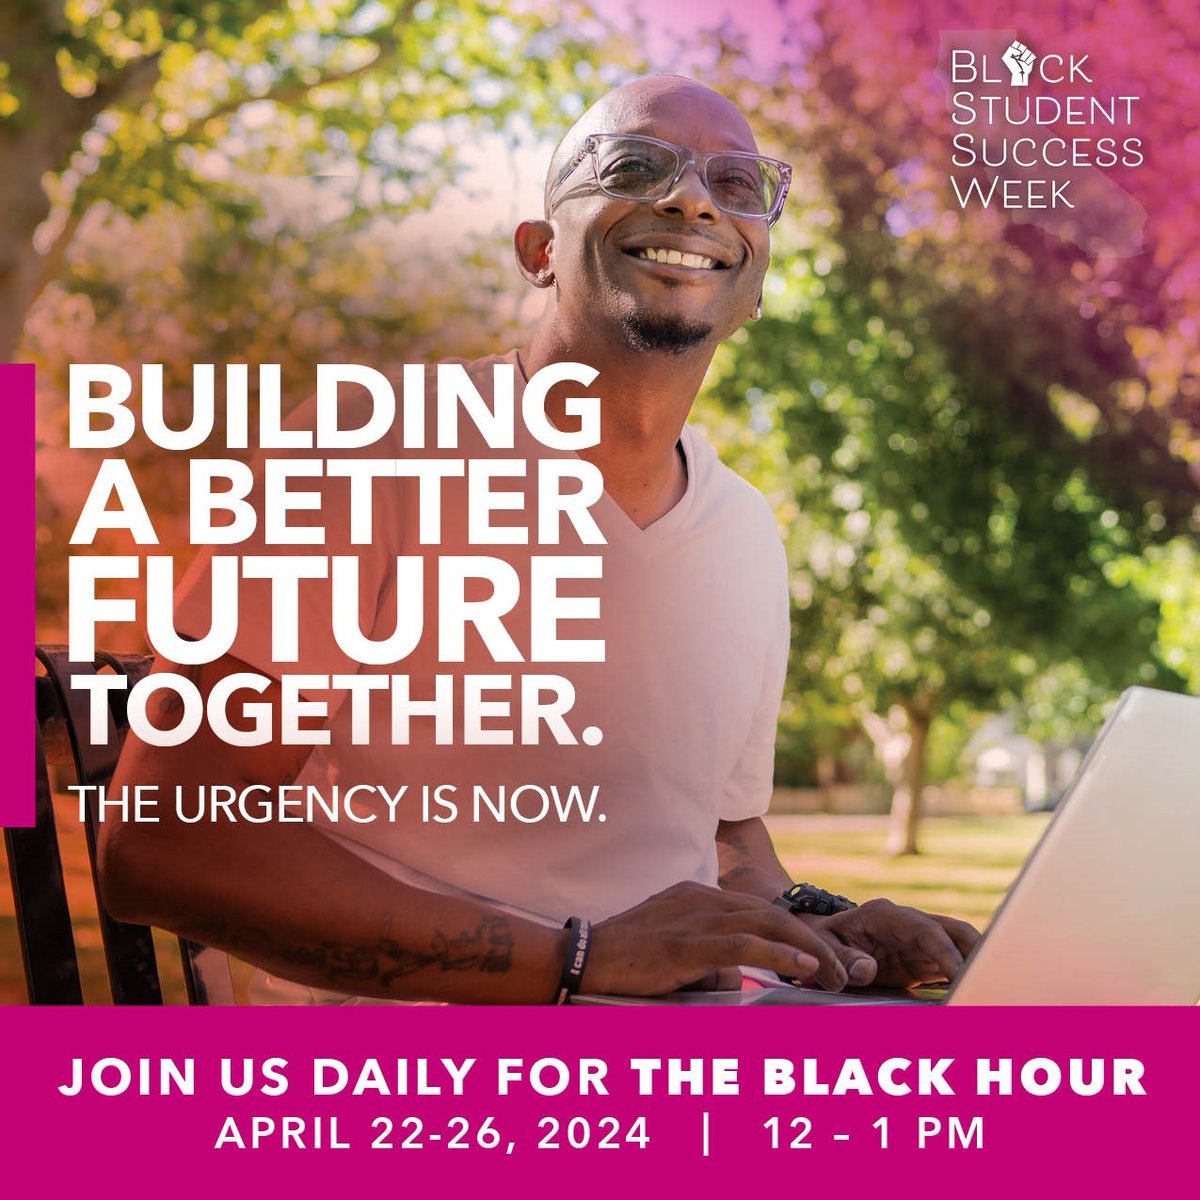 #BlackStudentSuccessWeek kicks off today! Join #TheStudentHour tonight for a session on Financial Intelligence + Basic Needs Workshop. Equitable access to #highered=ensuring ALL students can reach their goals. Register here: blkstudentsuccess.com